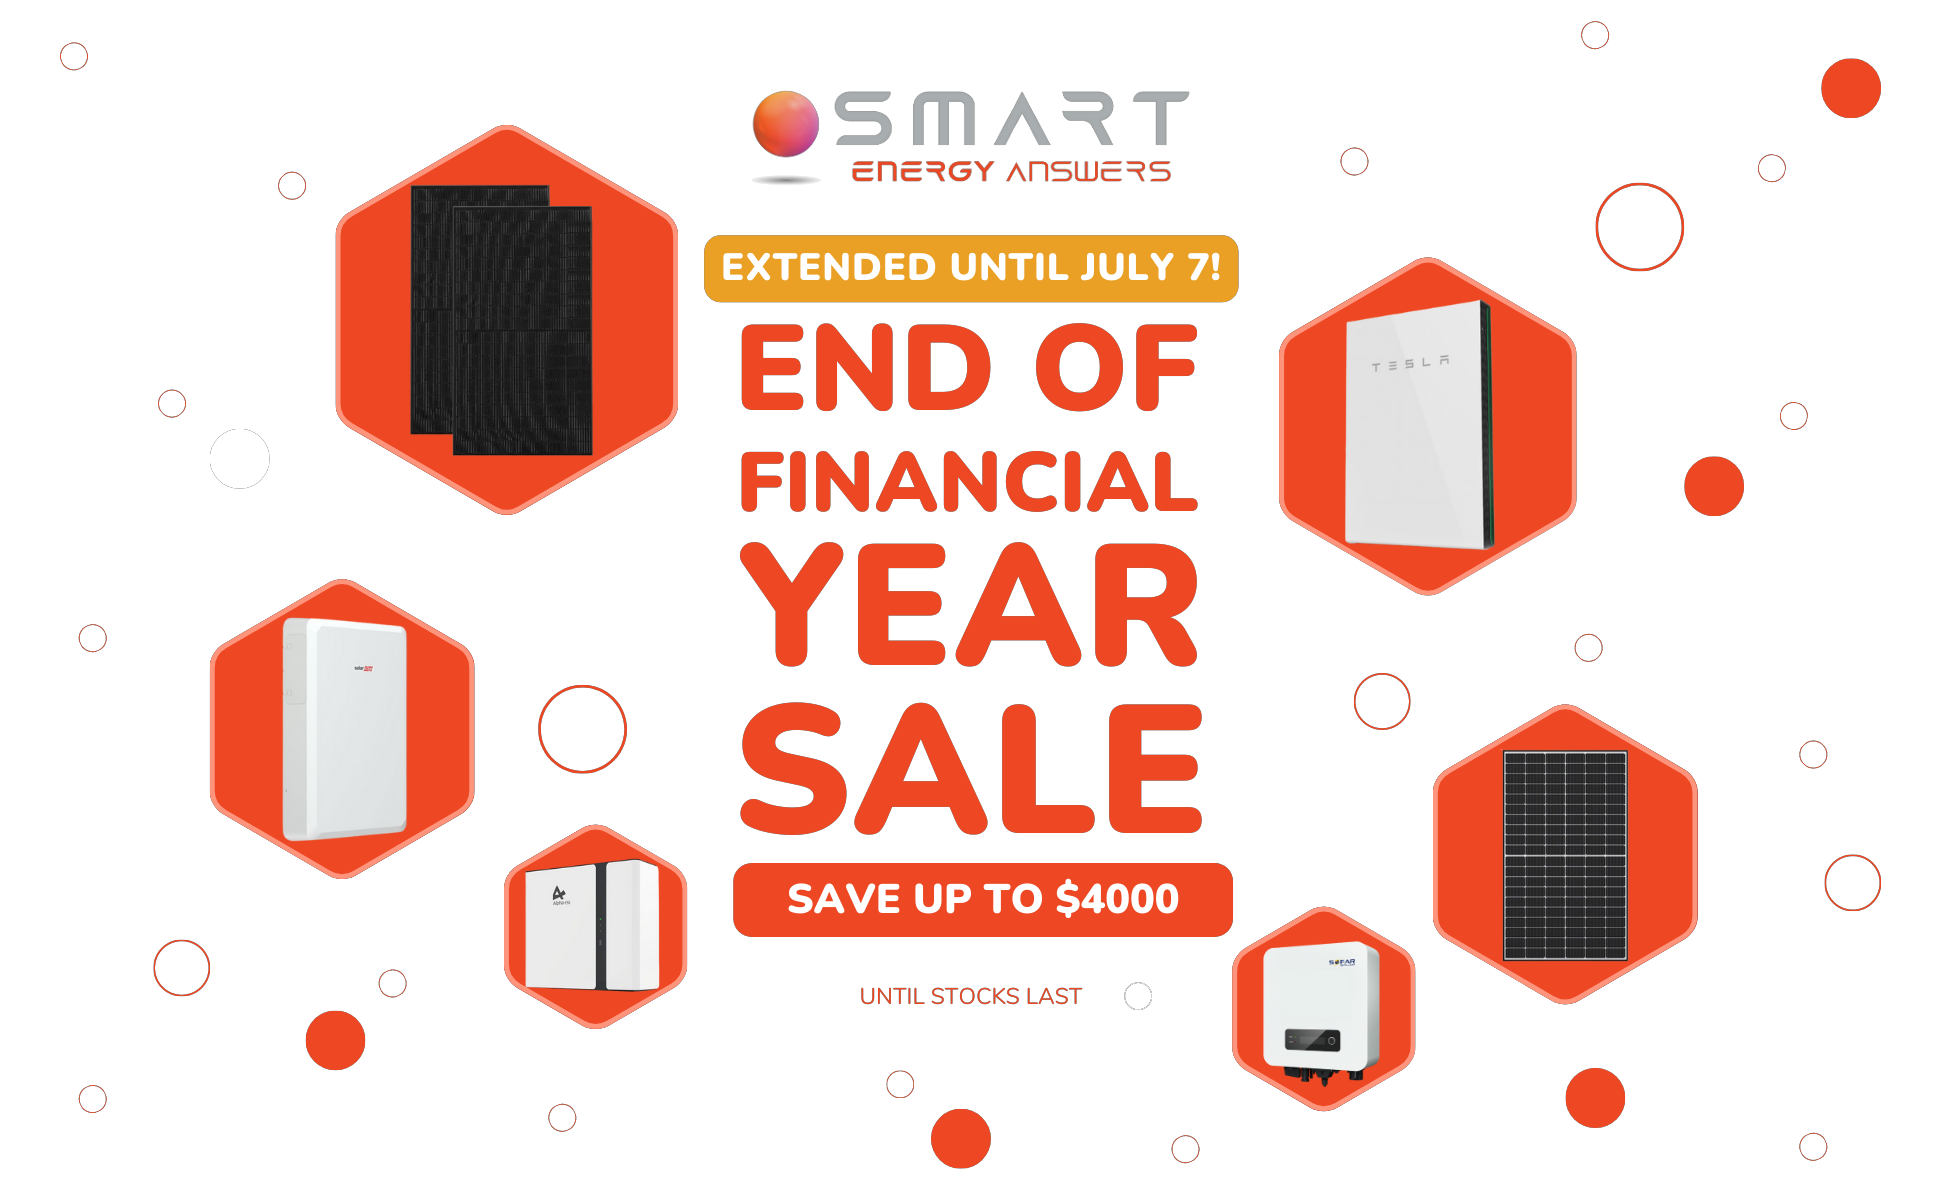 END OF FINANCIAL YEAR SALE - Copy